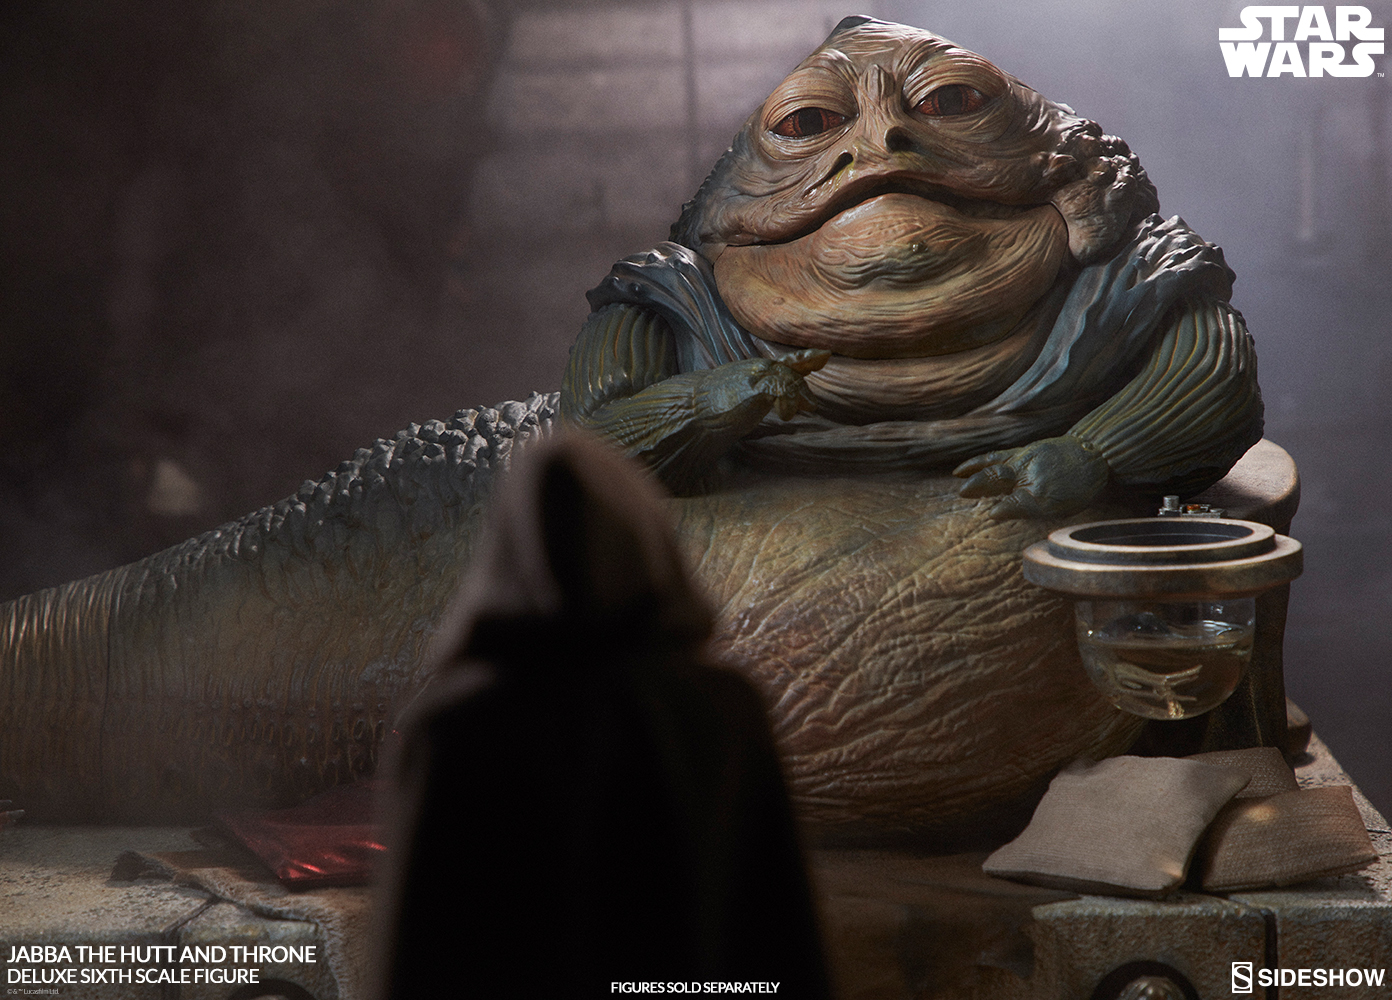 Star Wars Episode VI : Jabba the Hutt and throne - Deluxe Figure (Sideshow) MSEFPVDt_o